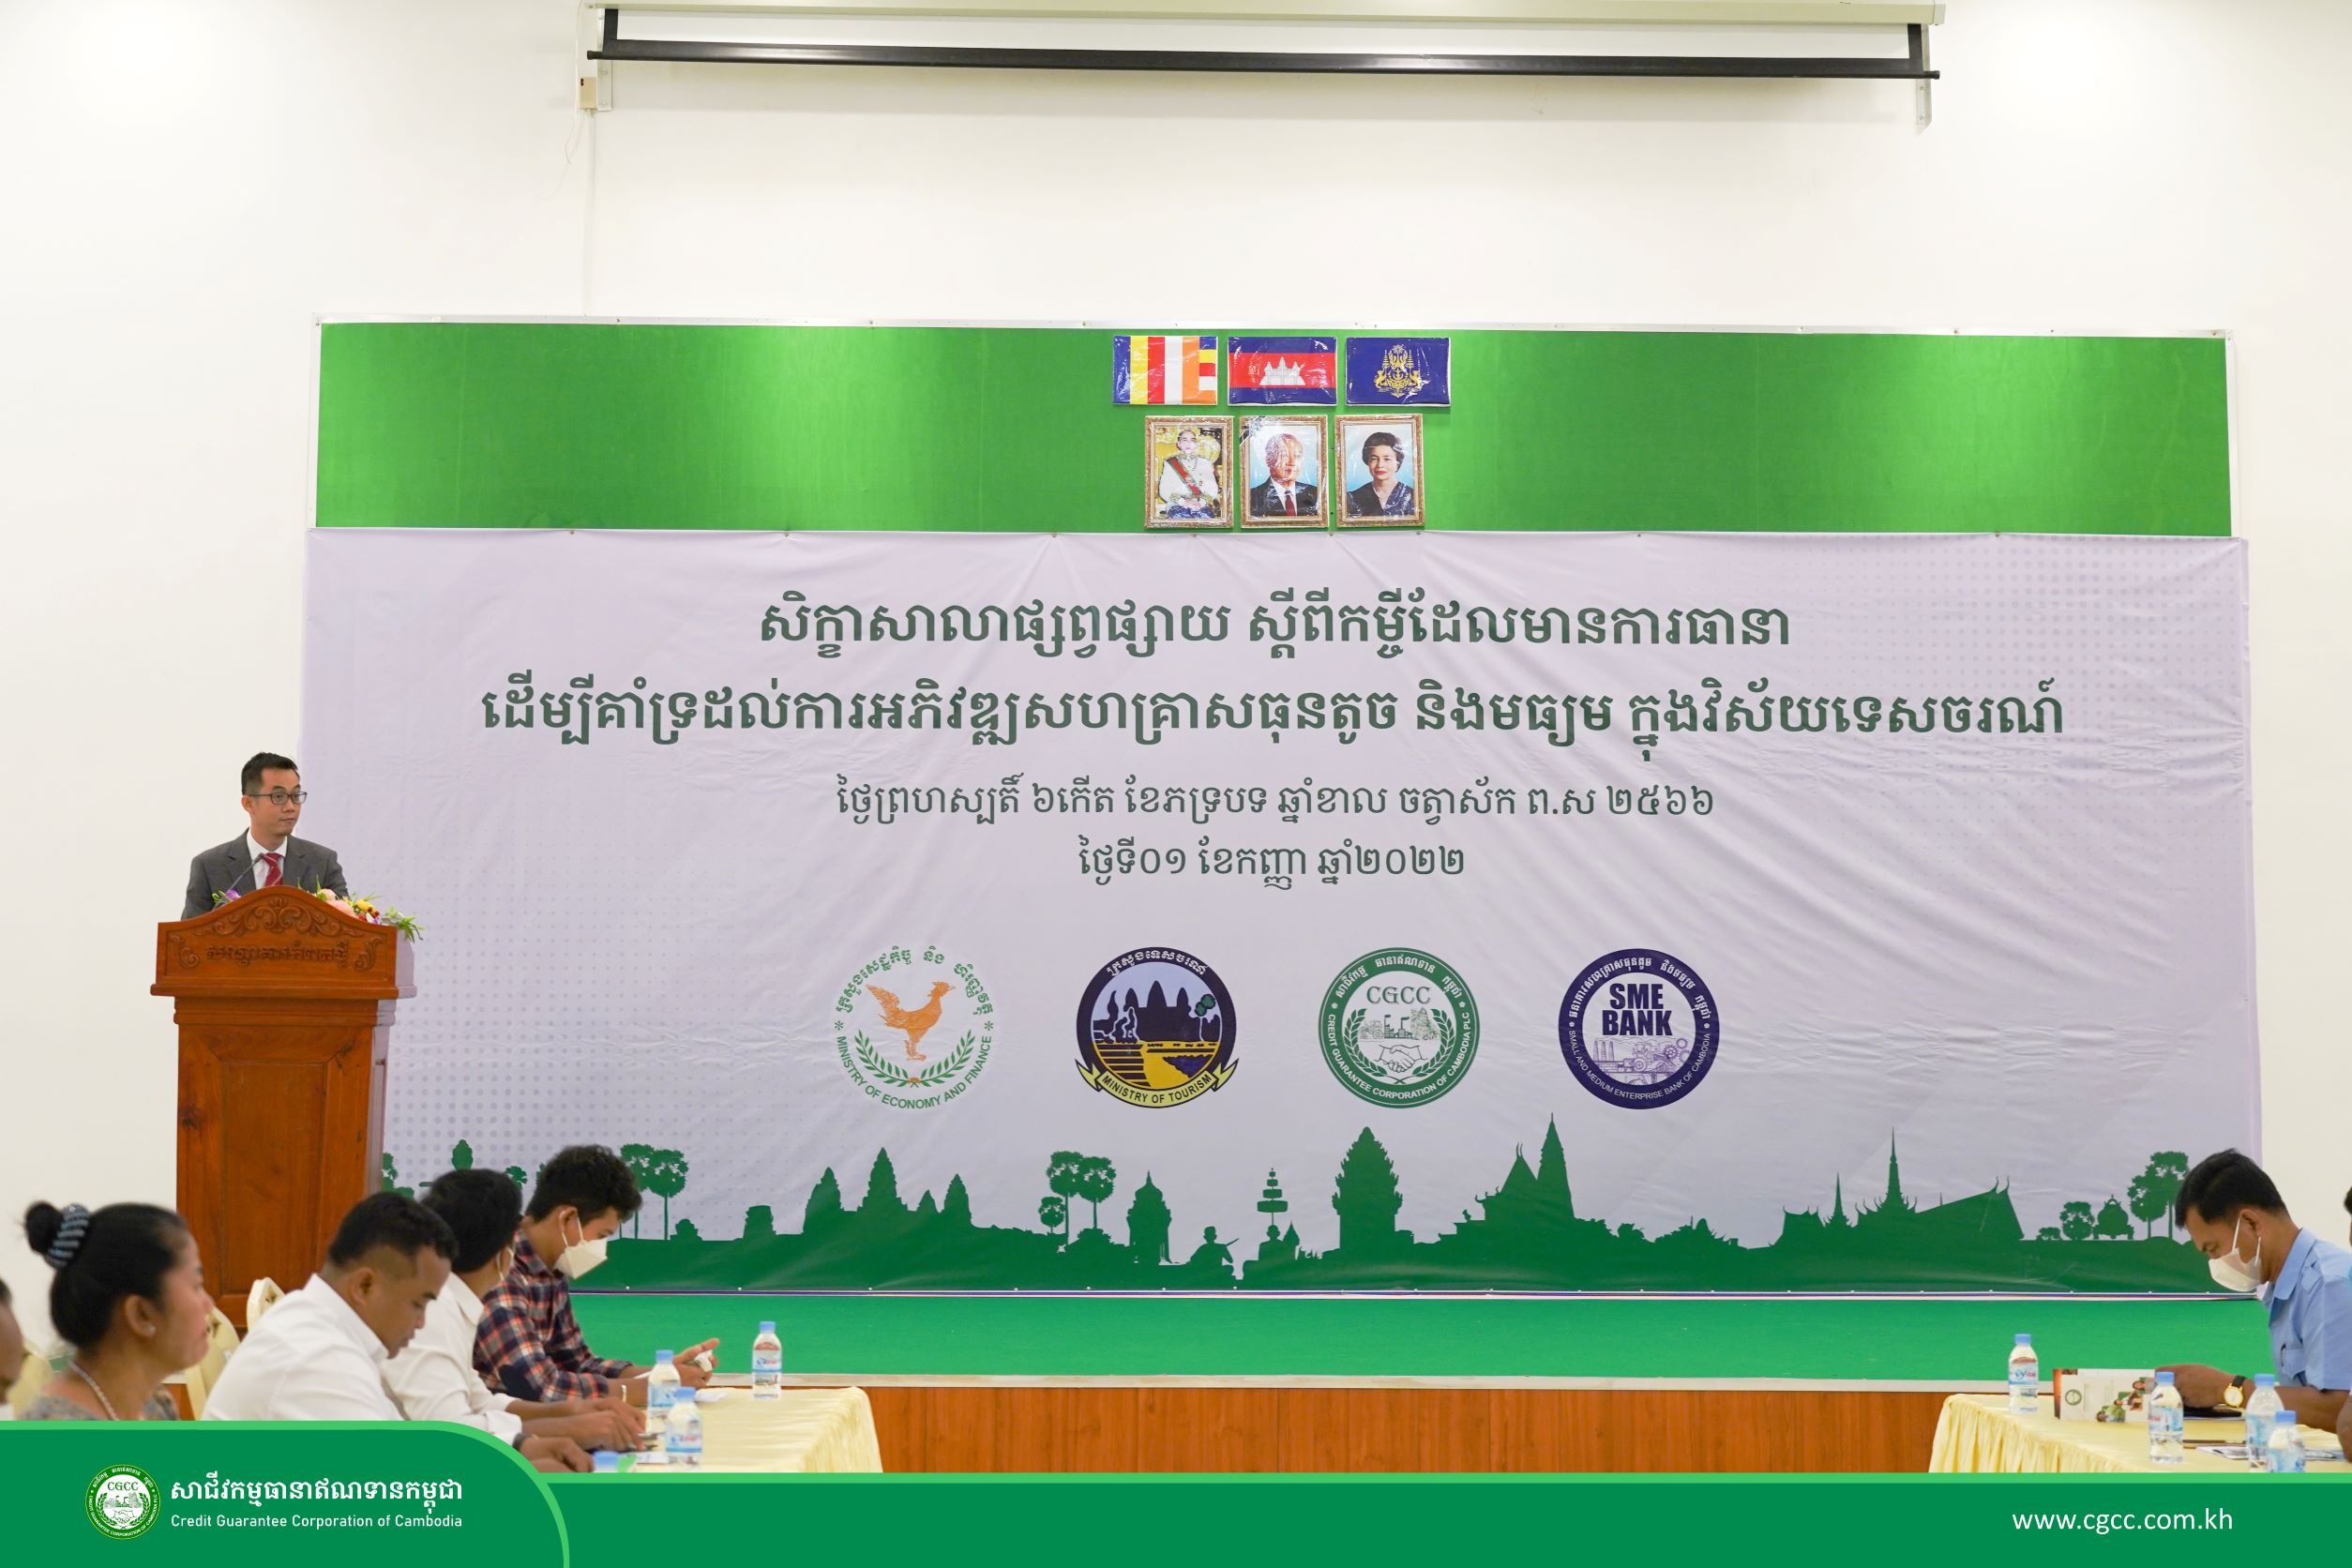 Dissemination Seminar on “Guaranteed Loans to support SMEs Development in Tourism Sector” organized by CGCC on 1 September 2022 in Kampot Province